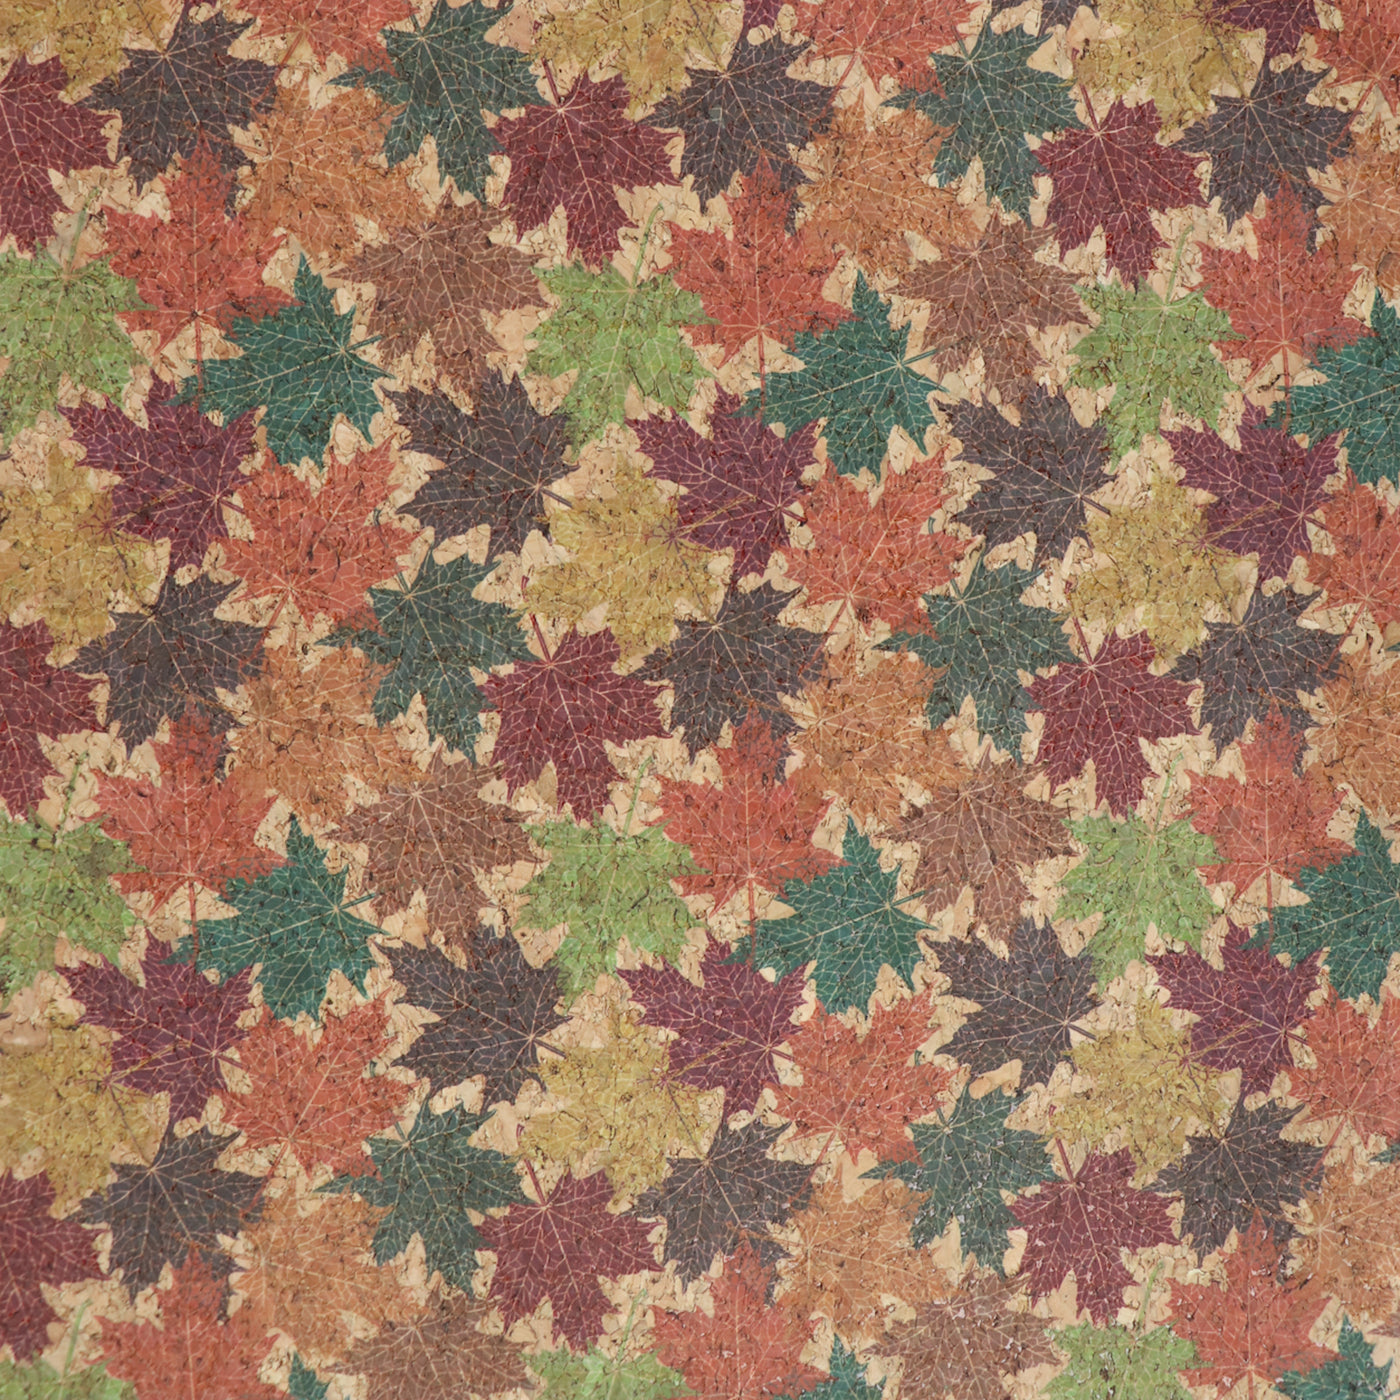 Limited Edition: Maple Leaves Cork Fabric